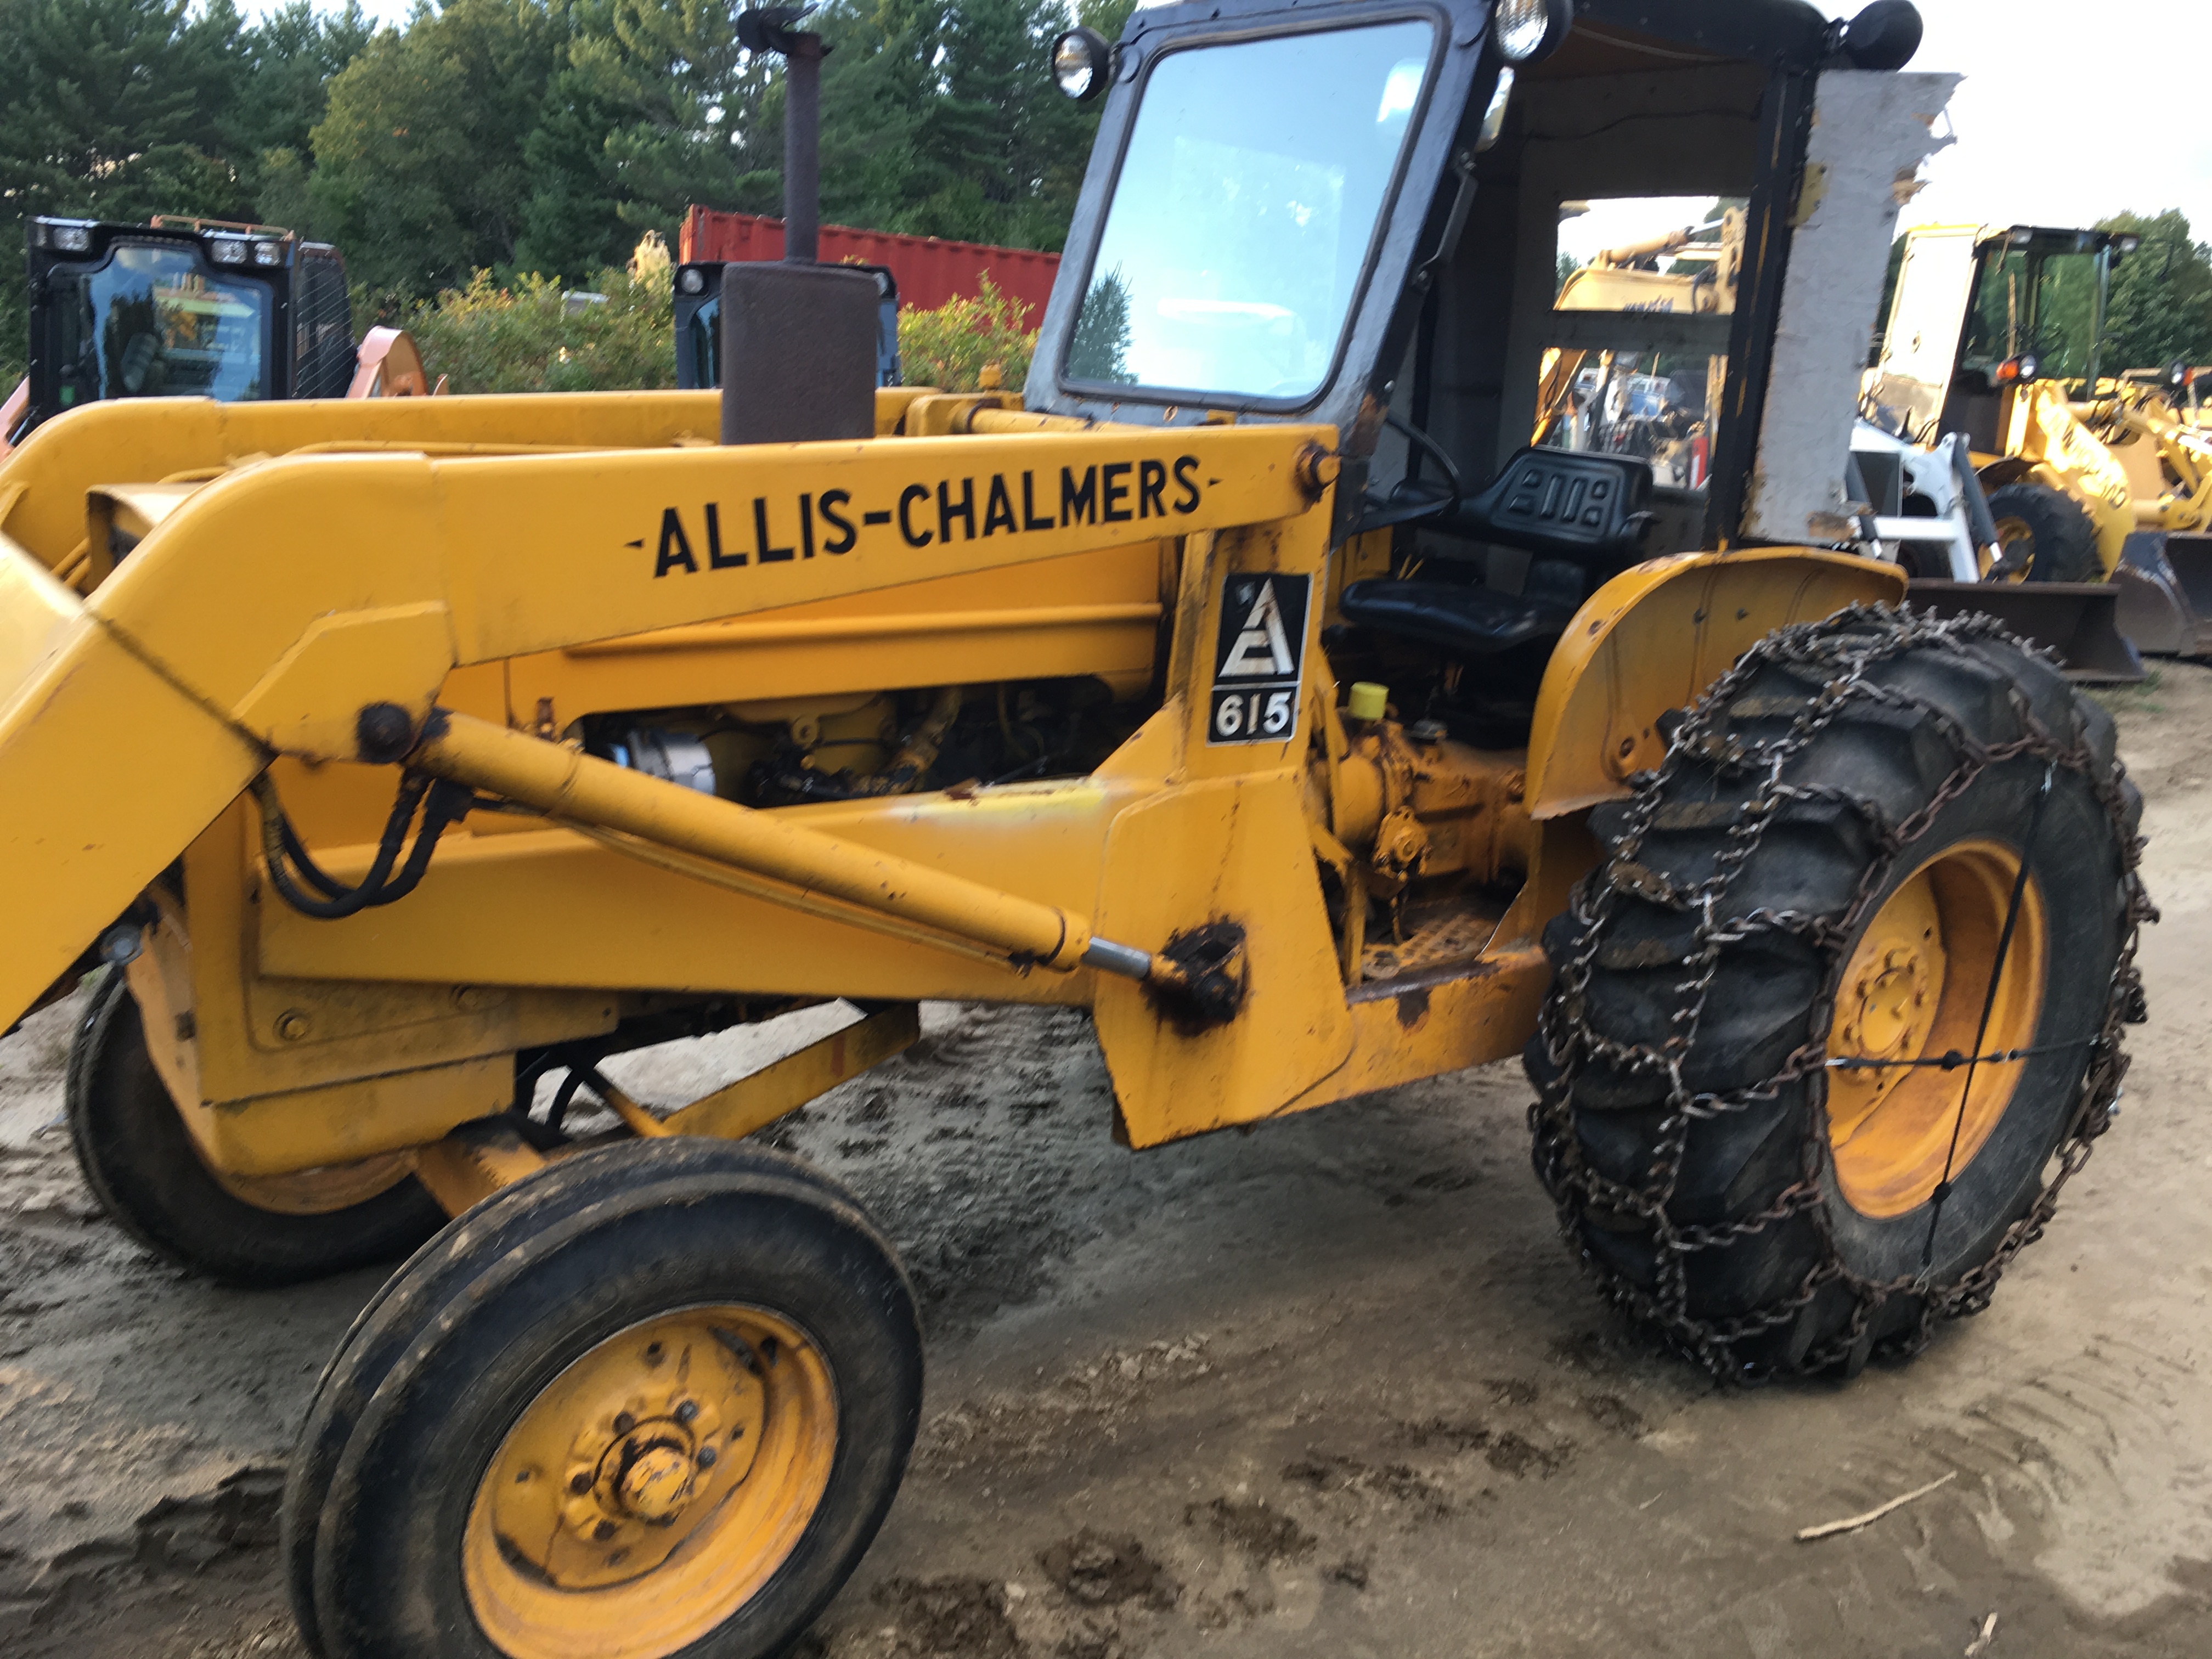 Allis Chalmers 615 Industrial tractor - loader. Has 3 point hitch and ...